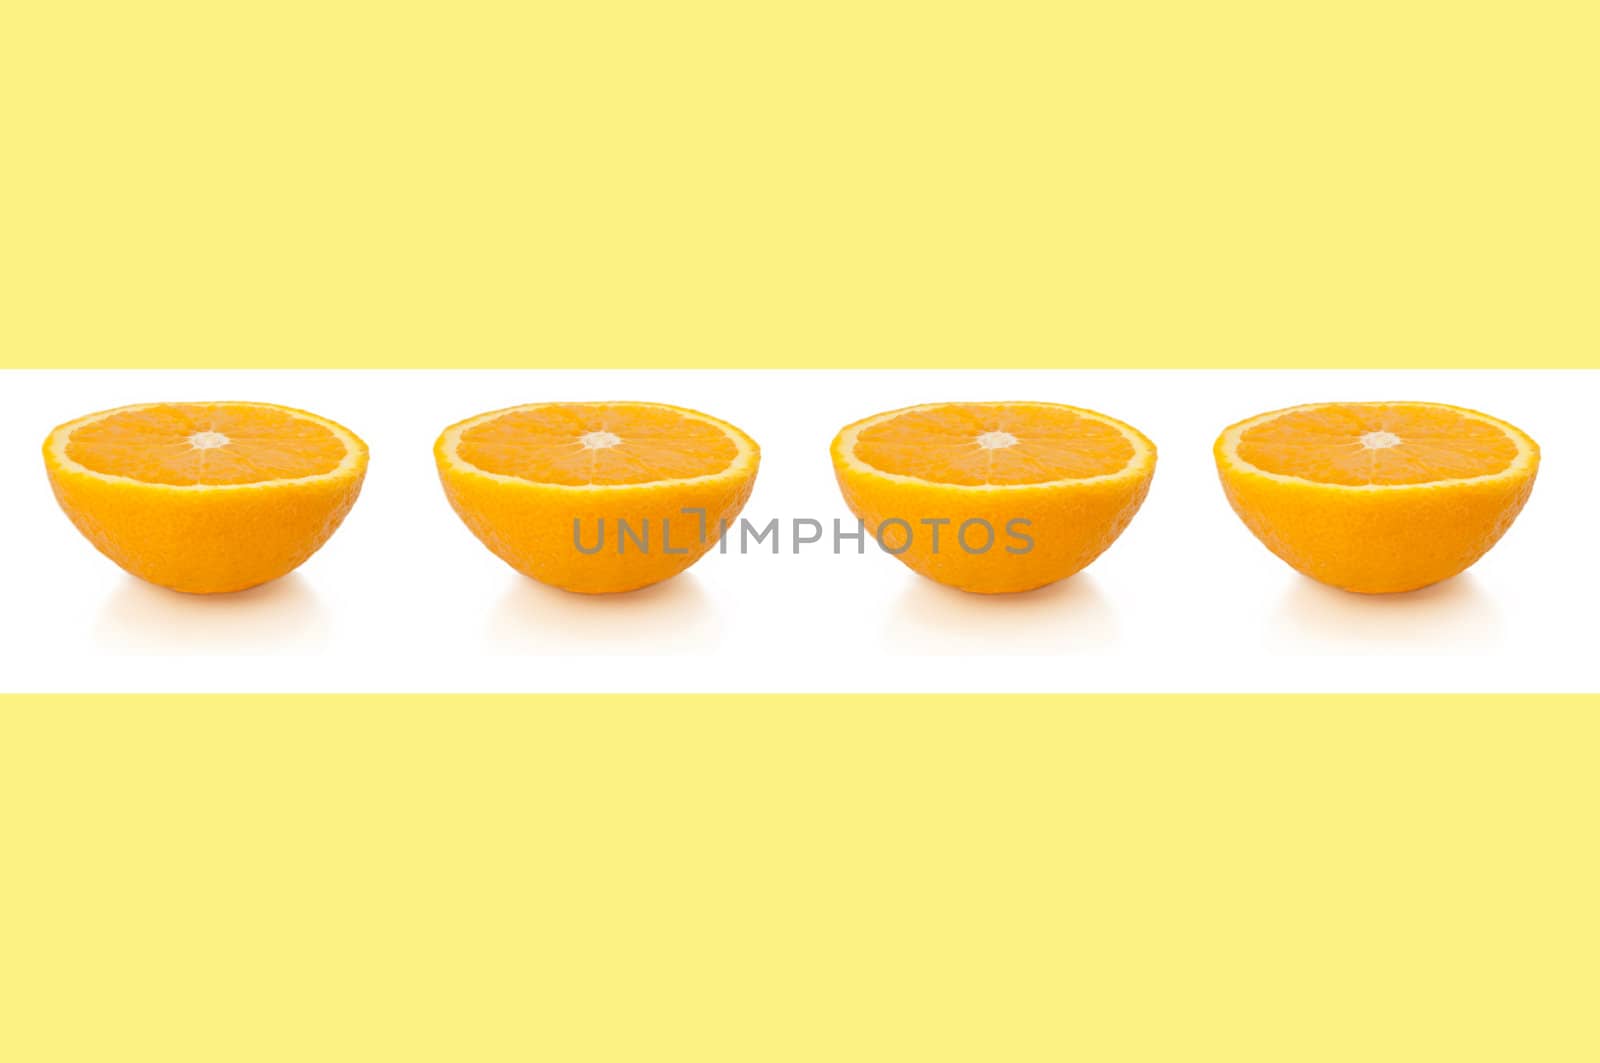 A line of small orange halves over white horizontal band against a pale yellow background.